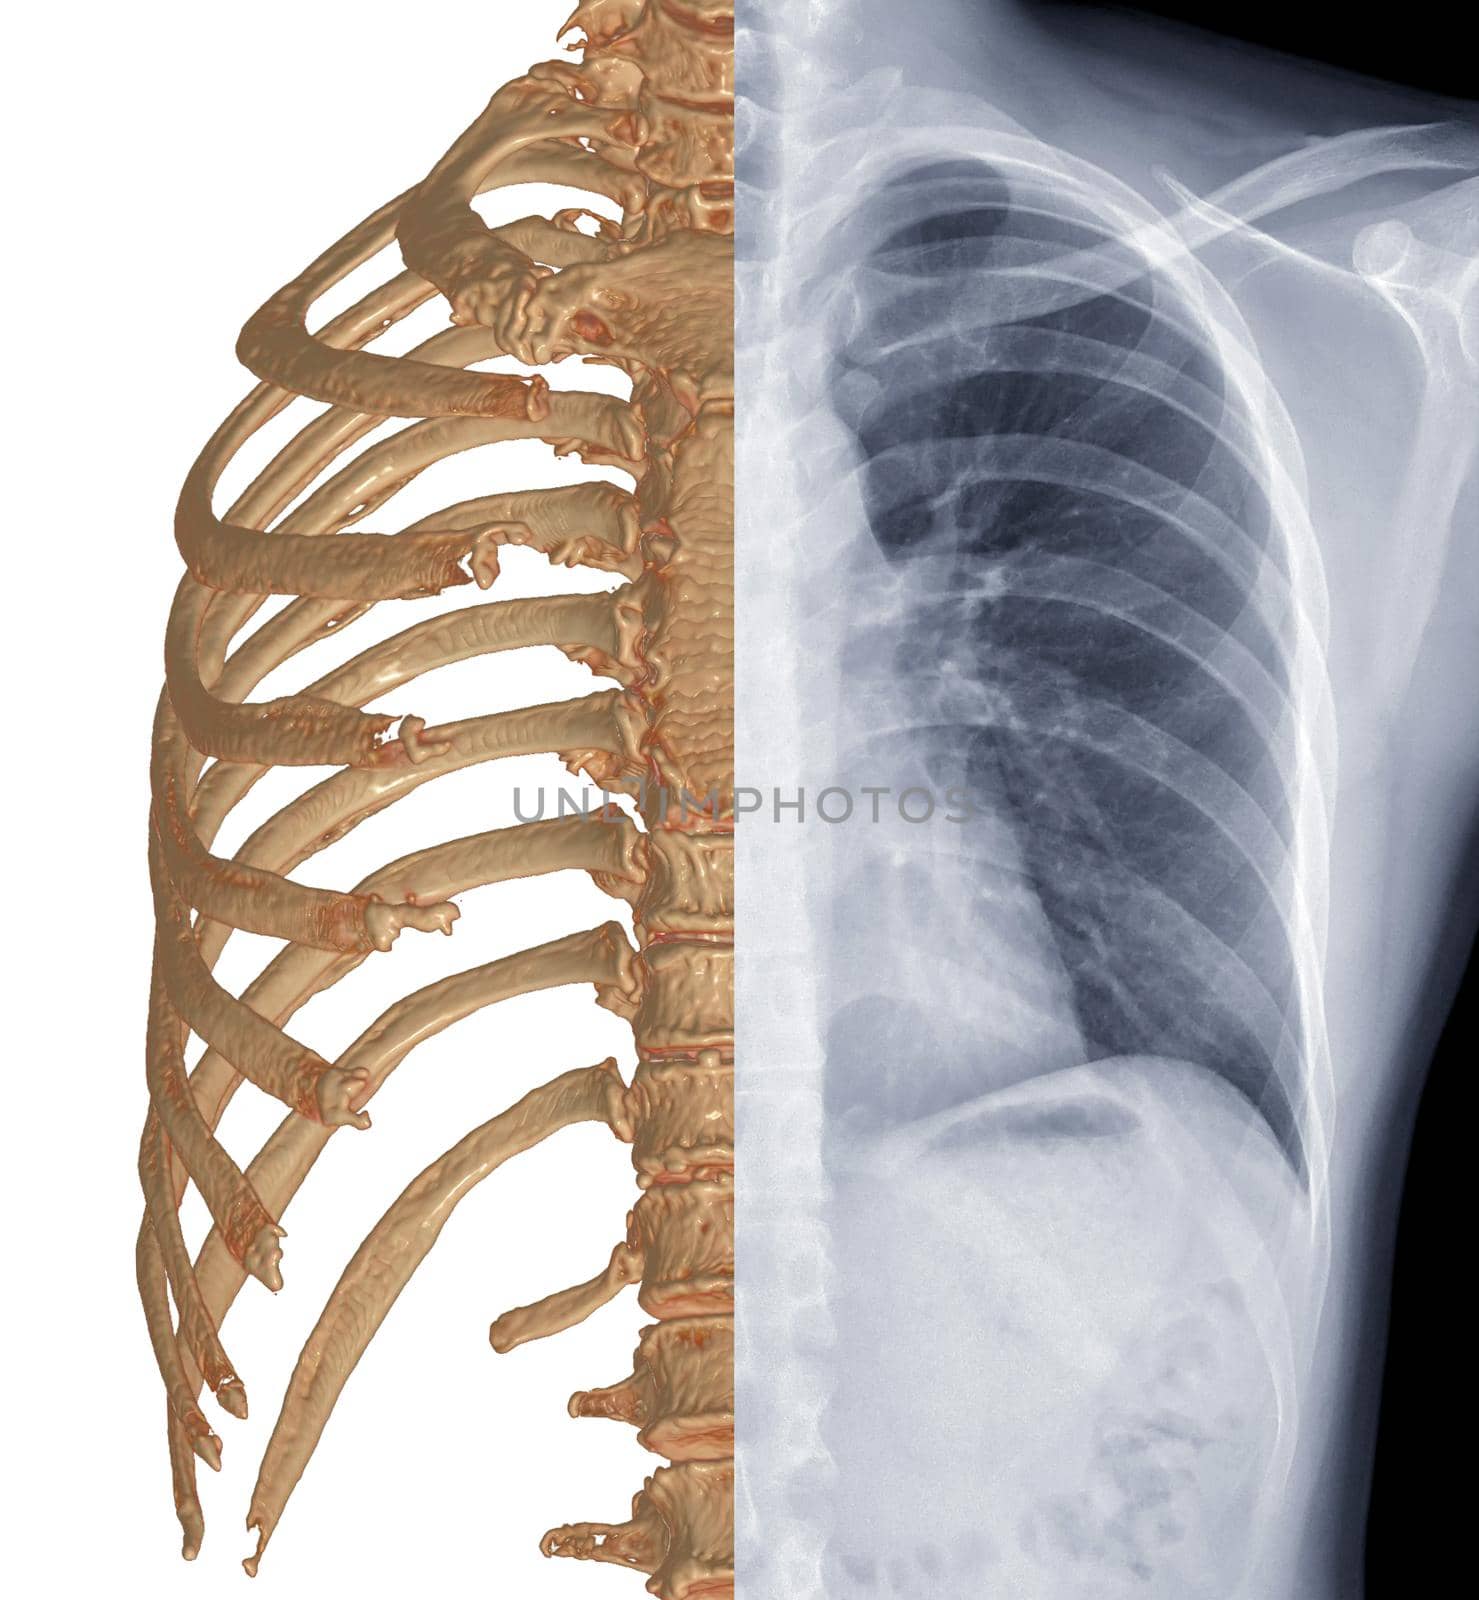 Compare CT Chest 3D rendering and Chest x-ray . by samunella